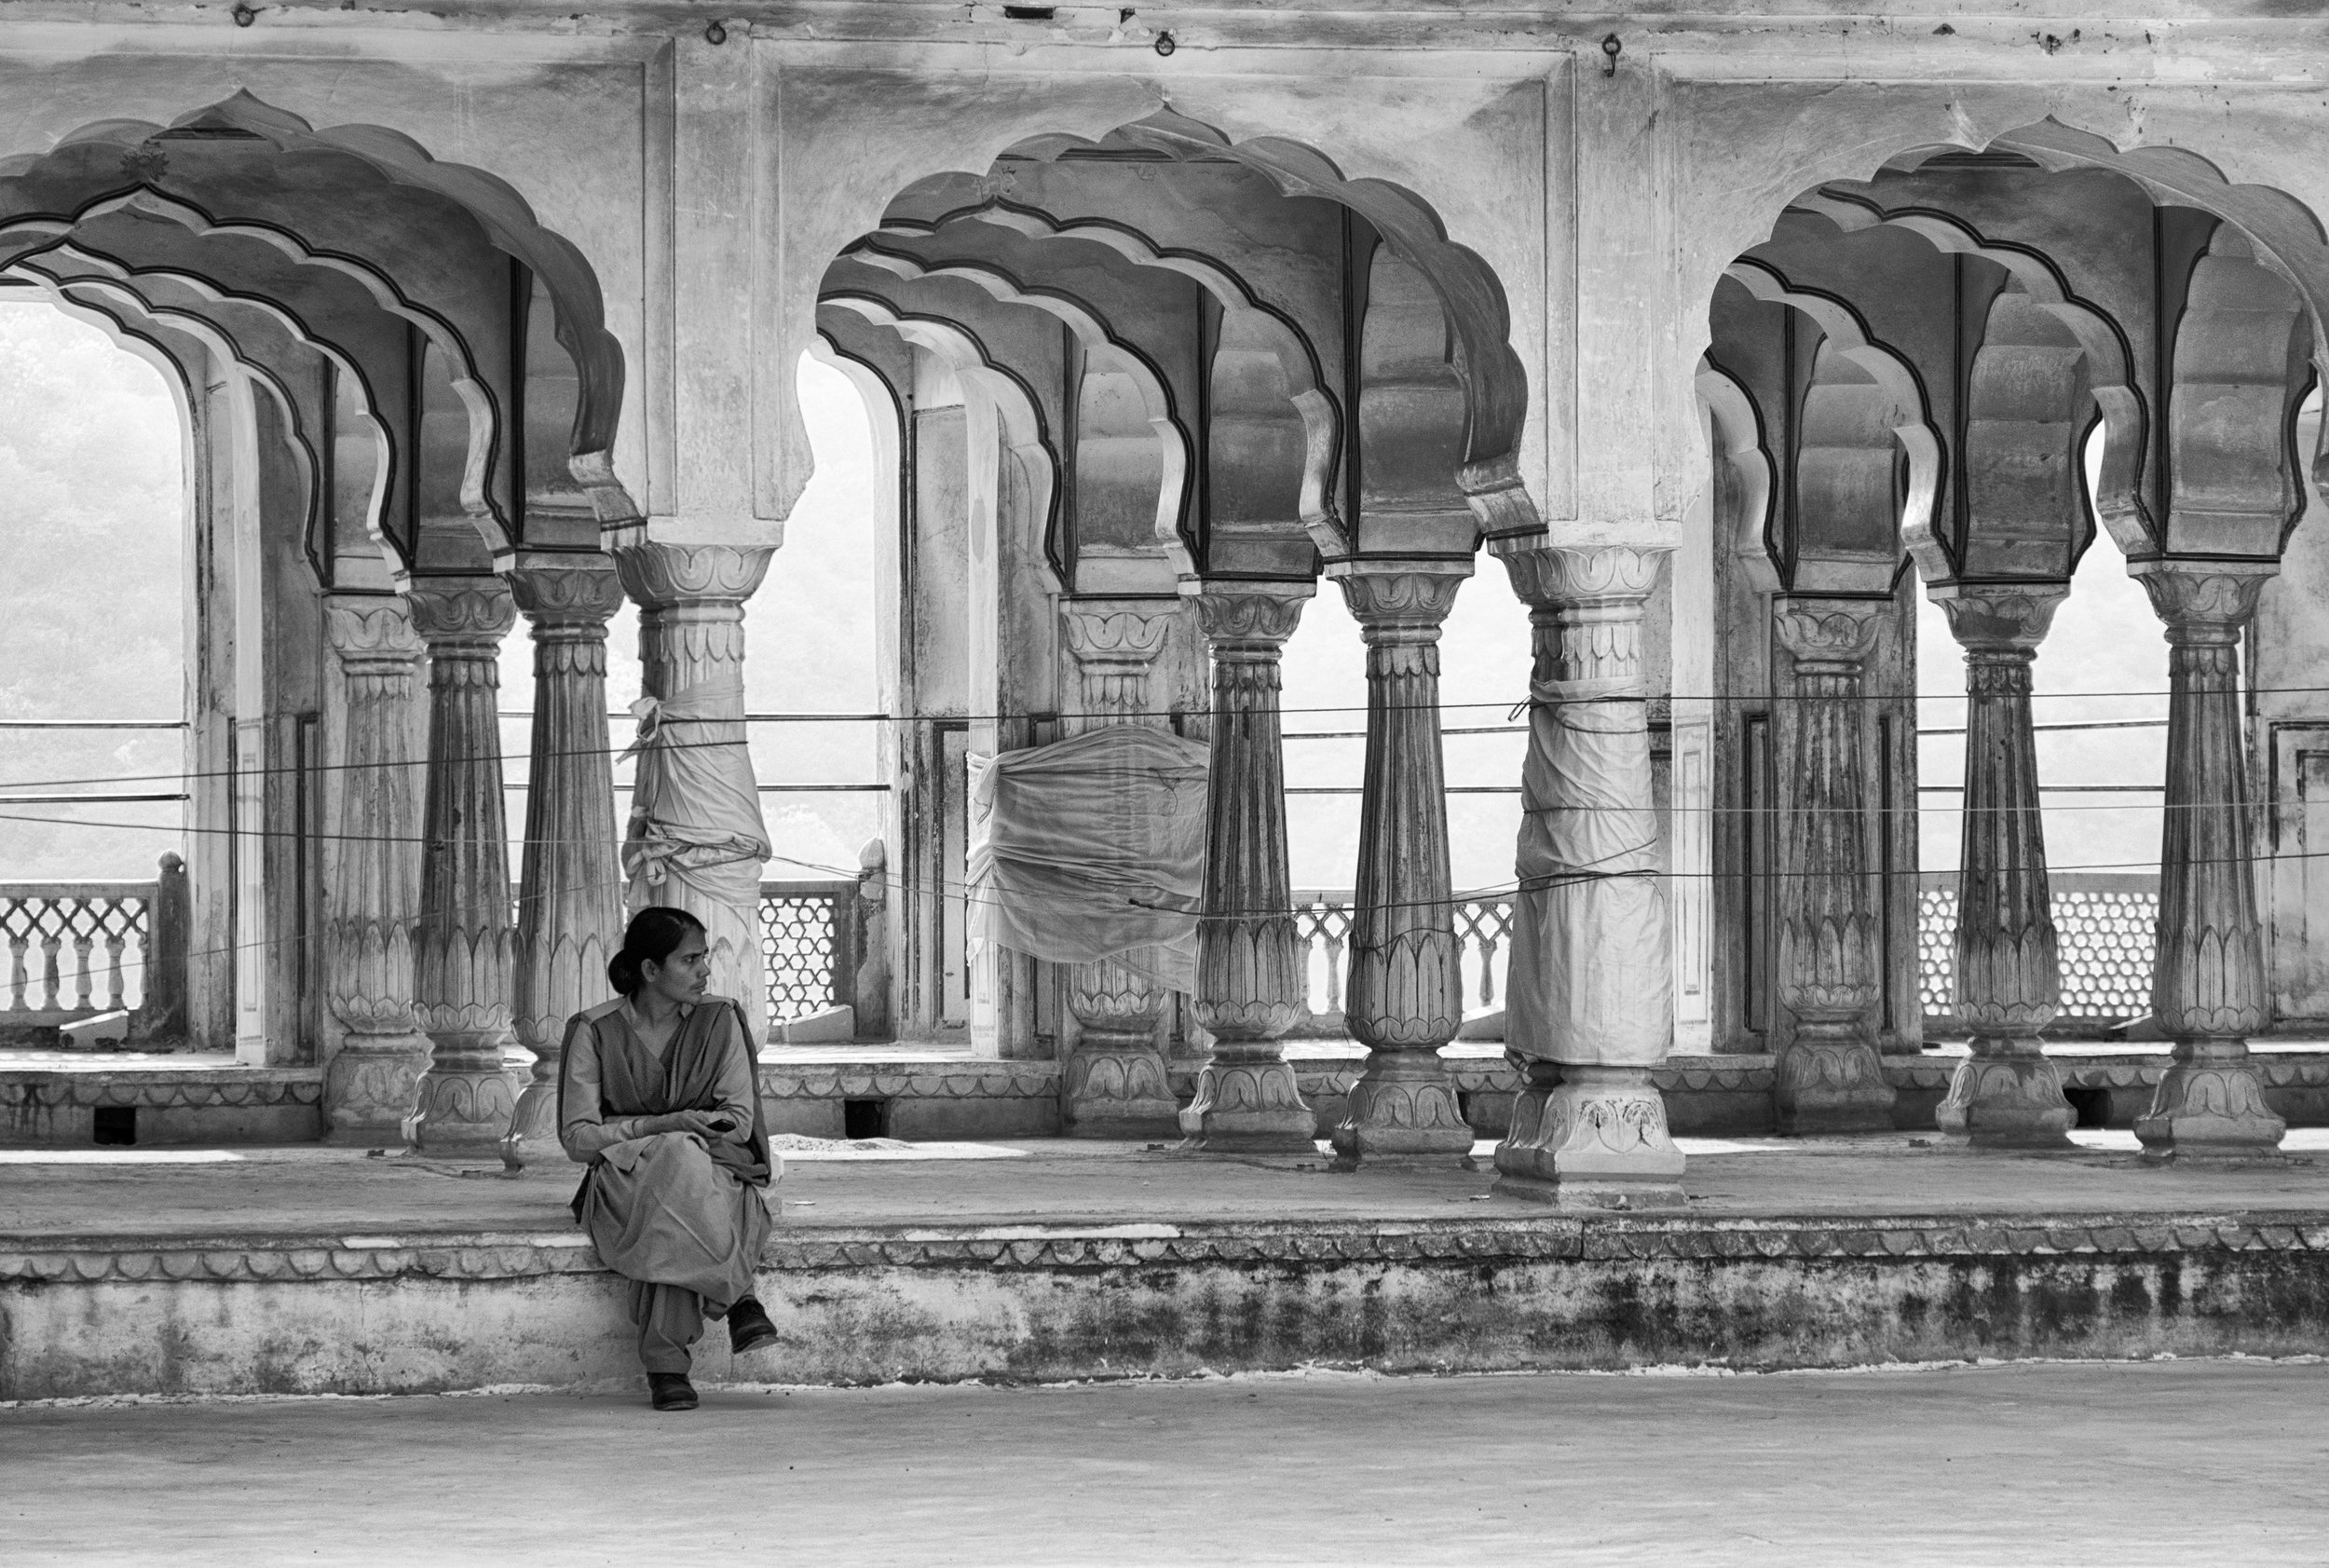 Woman Sitting by Scalloped Arches at Amber Fort - Jaipur, India - Copyright 2016 Ralph Velasco.jpg